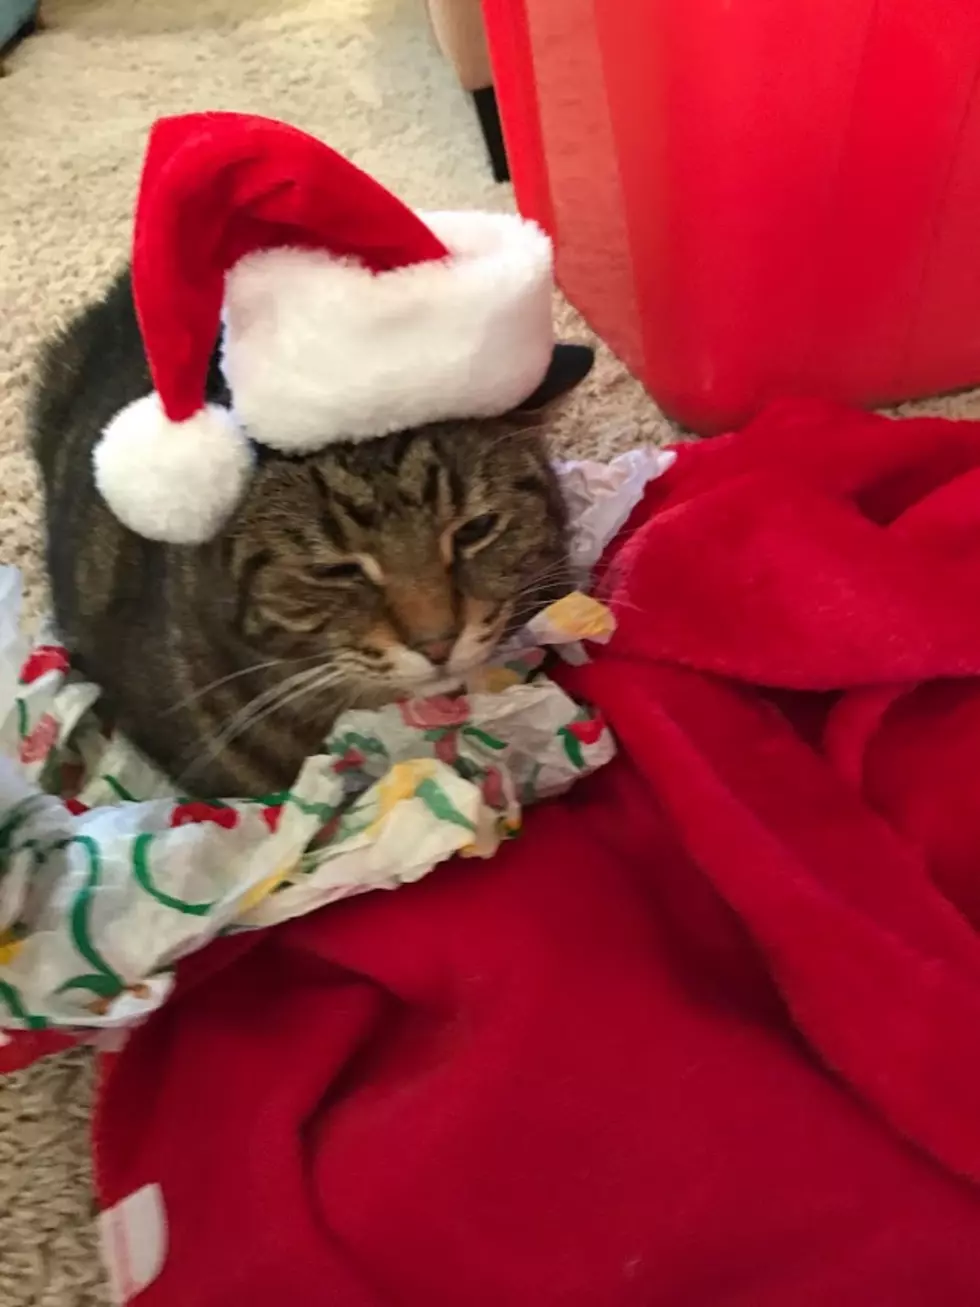 [pictures] Our Pets Wearing Santa Hats